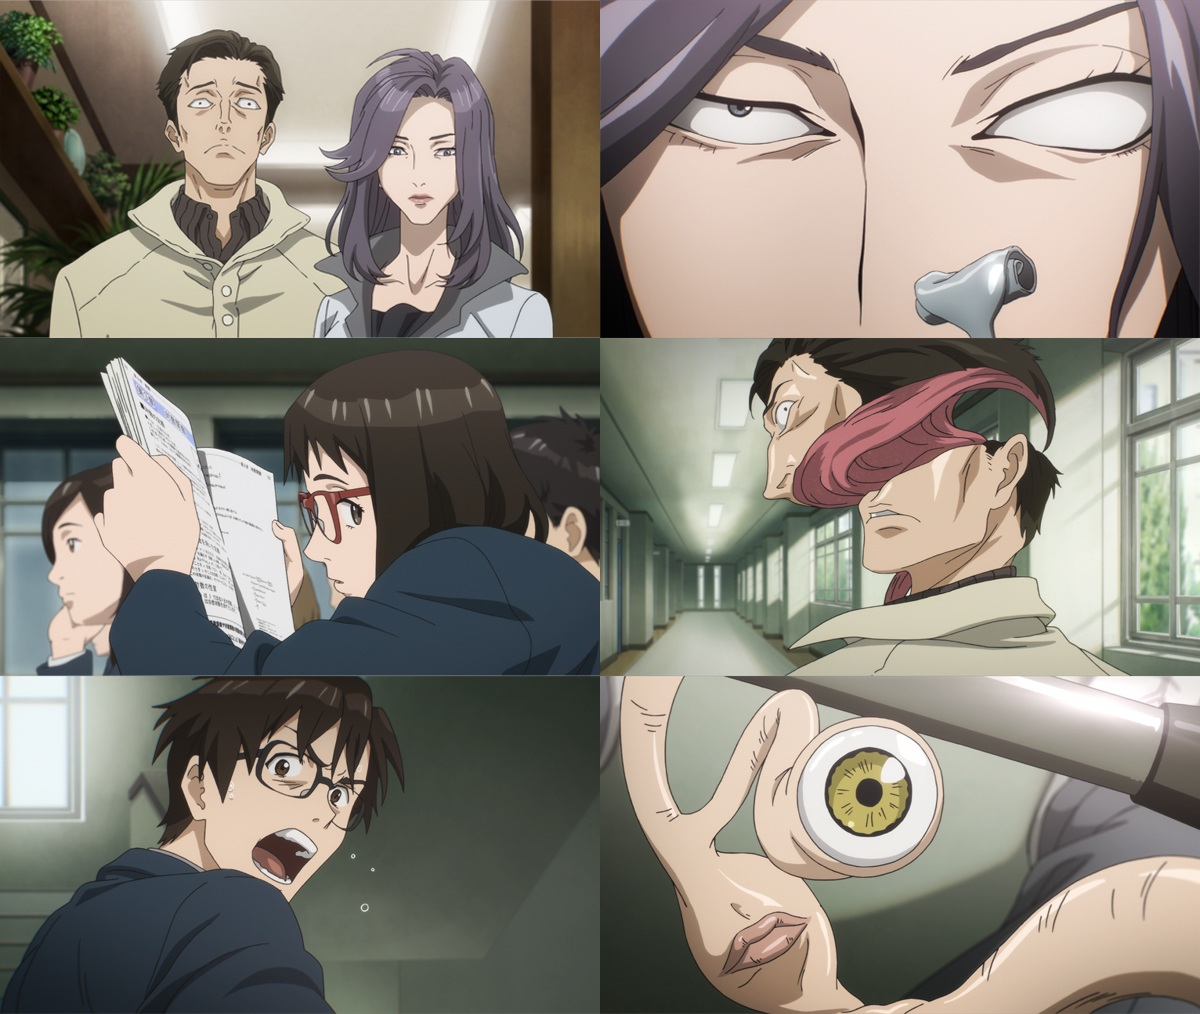 Parasyte: Exploration of what it means to be human | The Artifice